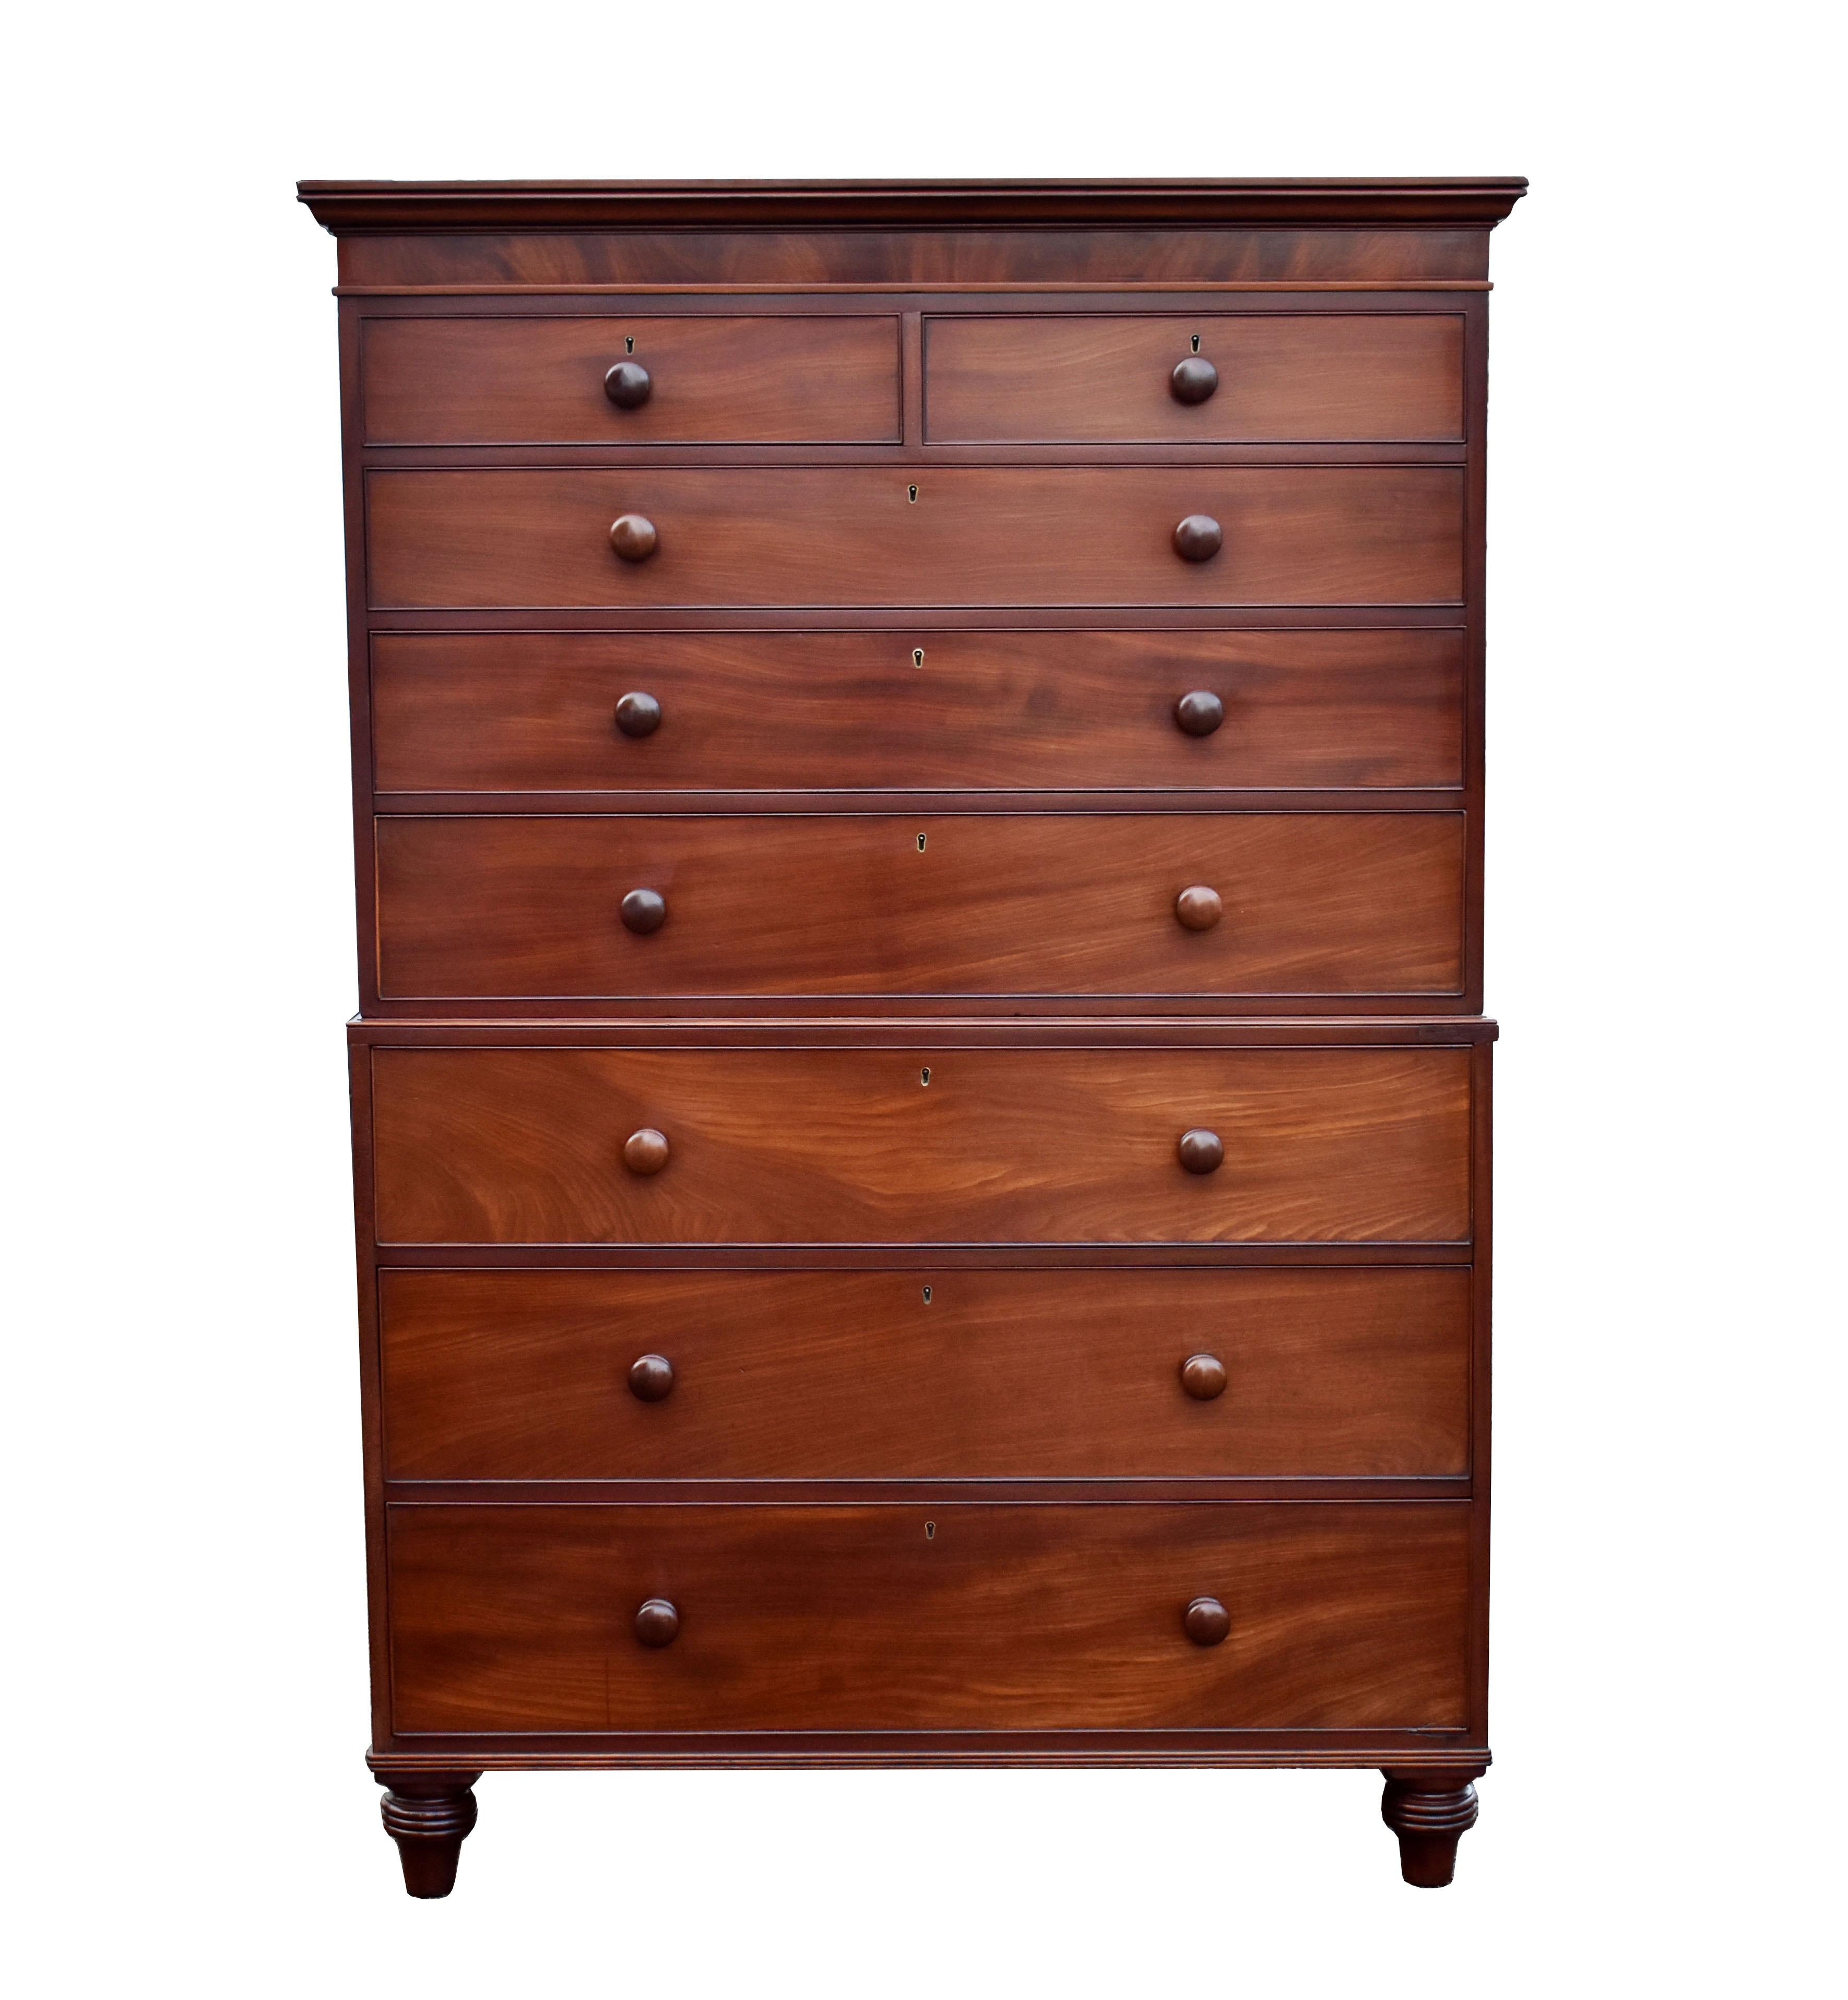 For sale is a good quality Victorian mahogany chest on chest. Having a flared cornice, above an arrangement of five drawers, the top chest has bun handles and fits onto the base chest, fitted with three more drawers. This piece is raised on turned